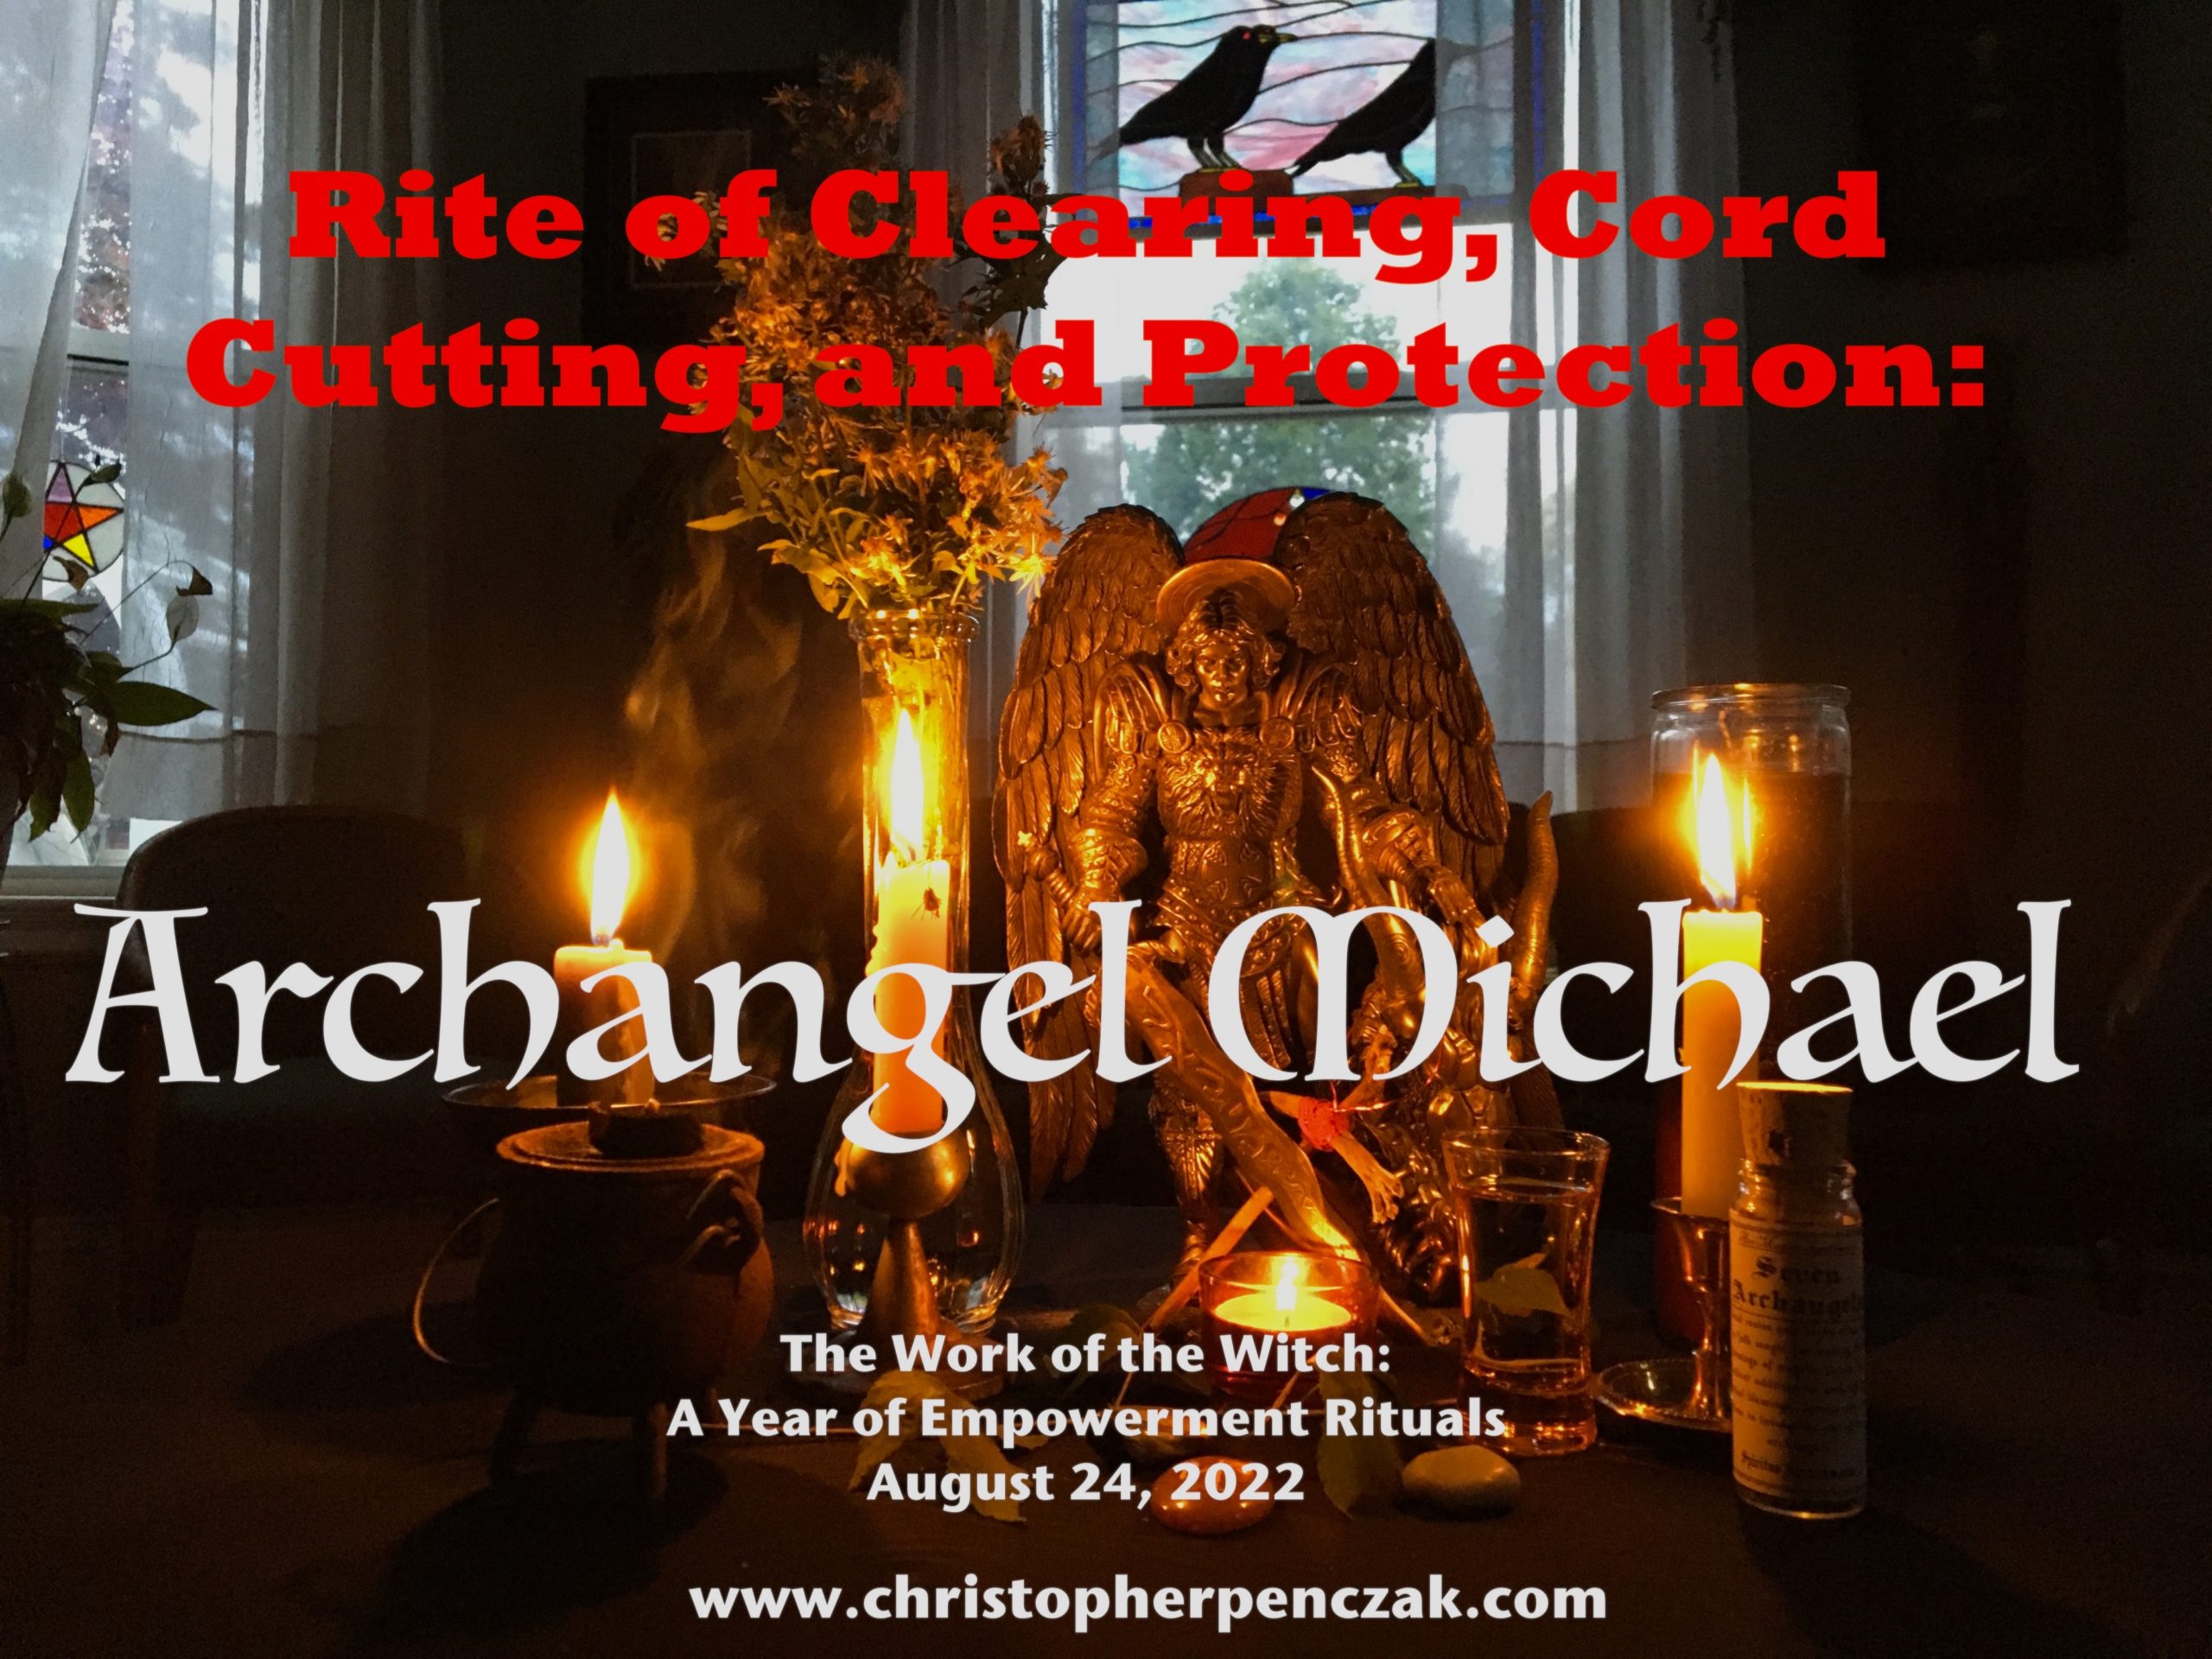 Rite of Clearing, Cord Cutting, and Protection: Archangel Michael